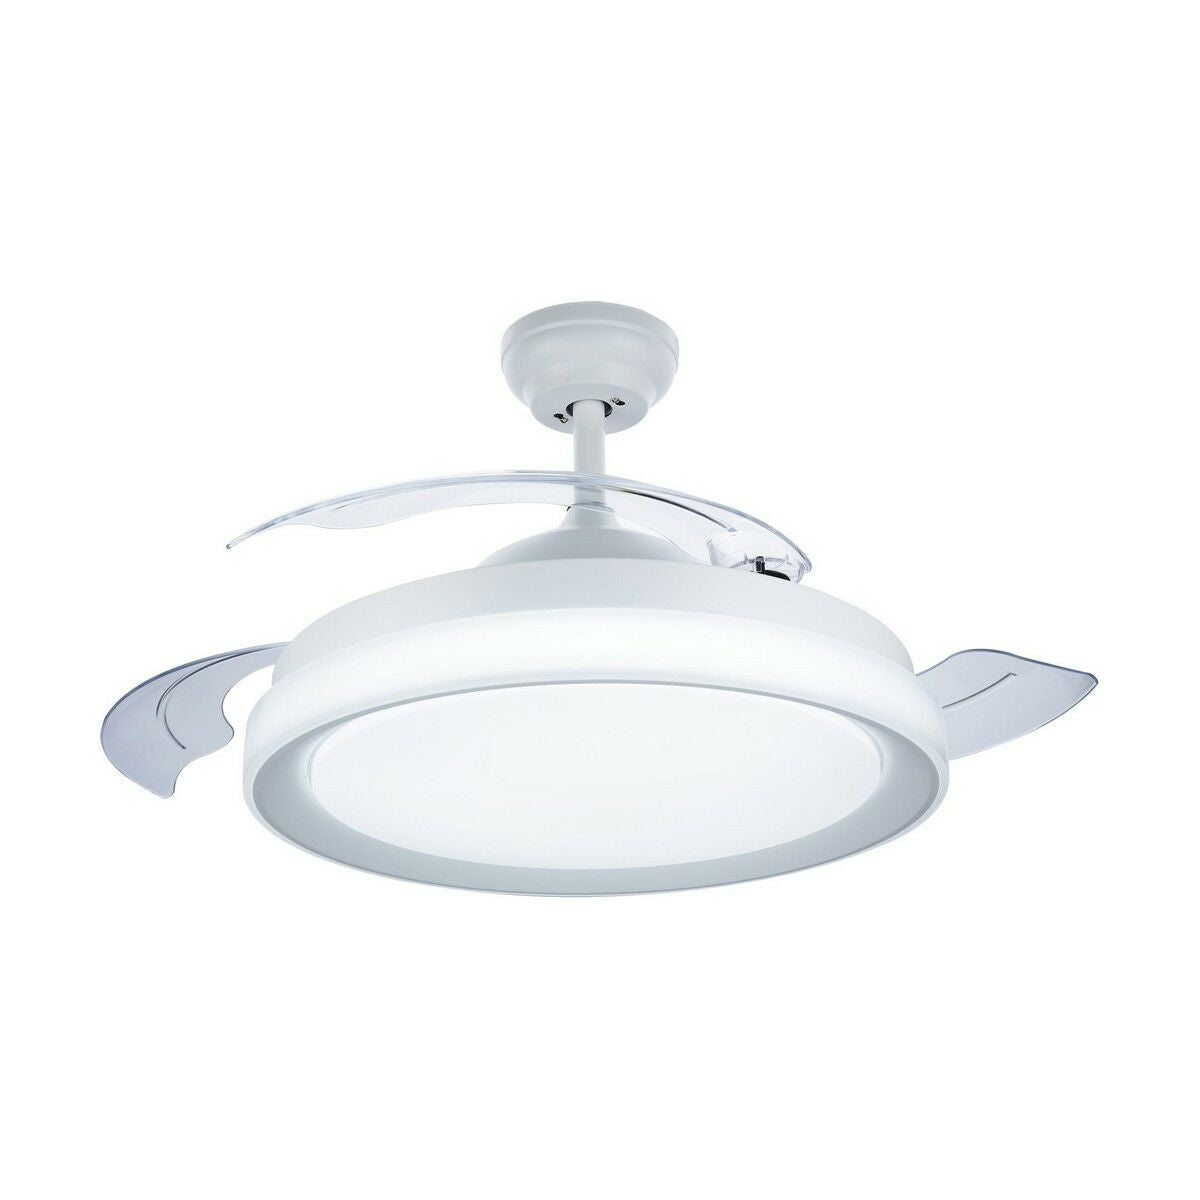 Ceiling Fan with Light Philips Lighting Bliss White 4500 Lm (2700k) (4000 K), Philips, Lighting, Indoor lighting, ceiling-fan-with-light-philips-lighting-bliss-white-4500-lm-2700k-4000-k, Brand_Philips, category-reference-2399, category-reference-2450, category-reference-2451, category-reference-t-10333, category-reference-t-10347, category-reference-t-19657, Condition_NEW, led / lighting, Price_100 - 200, small electric appliances, summer, RiotNook